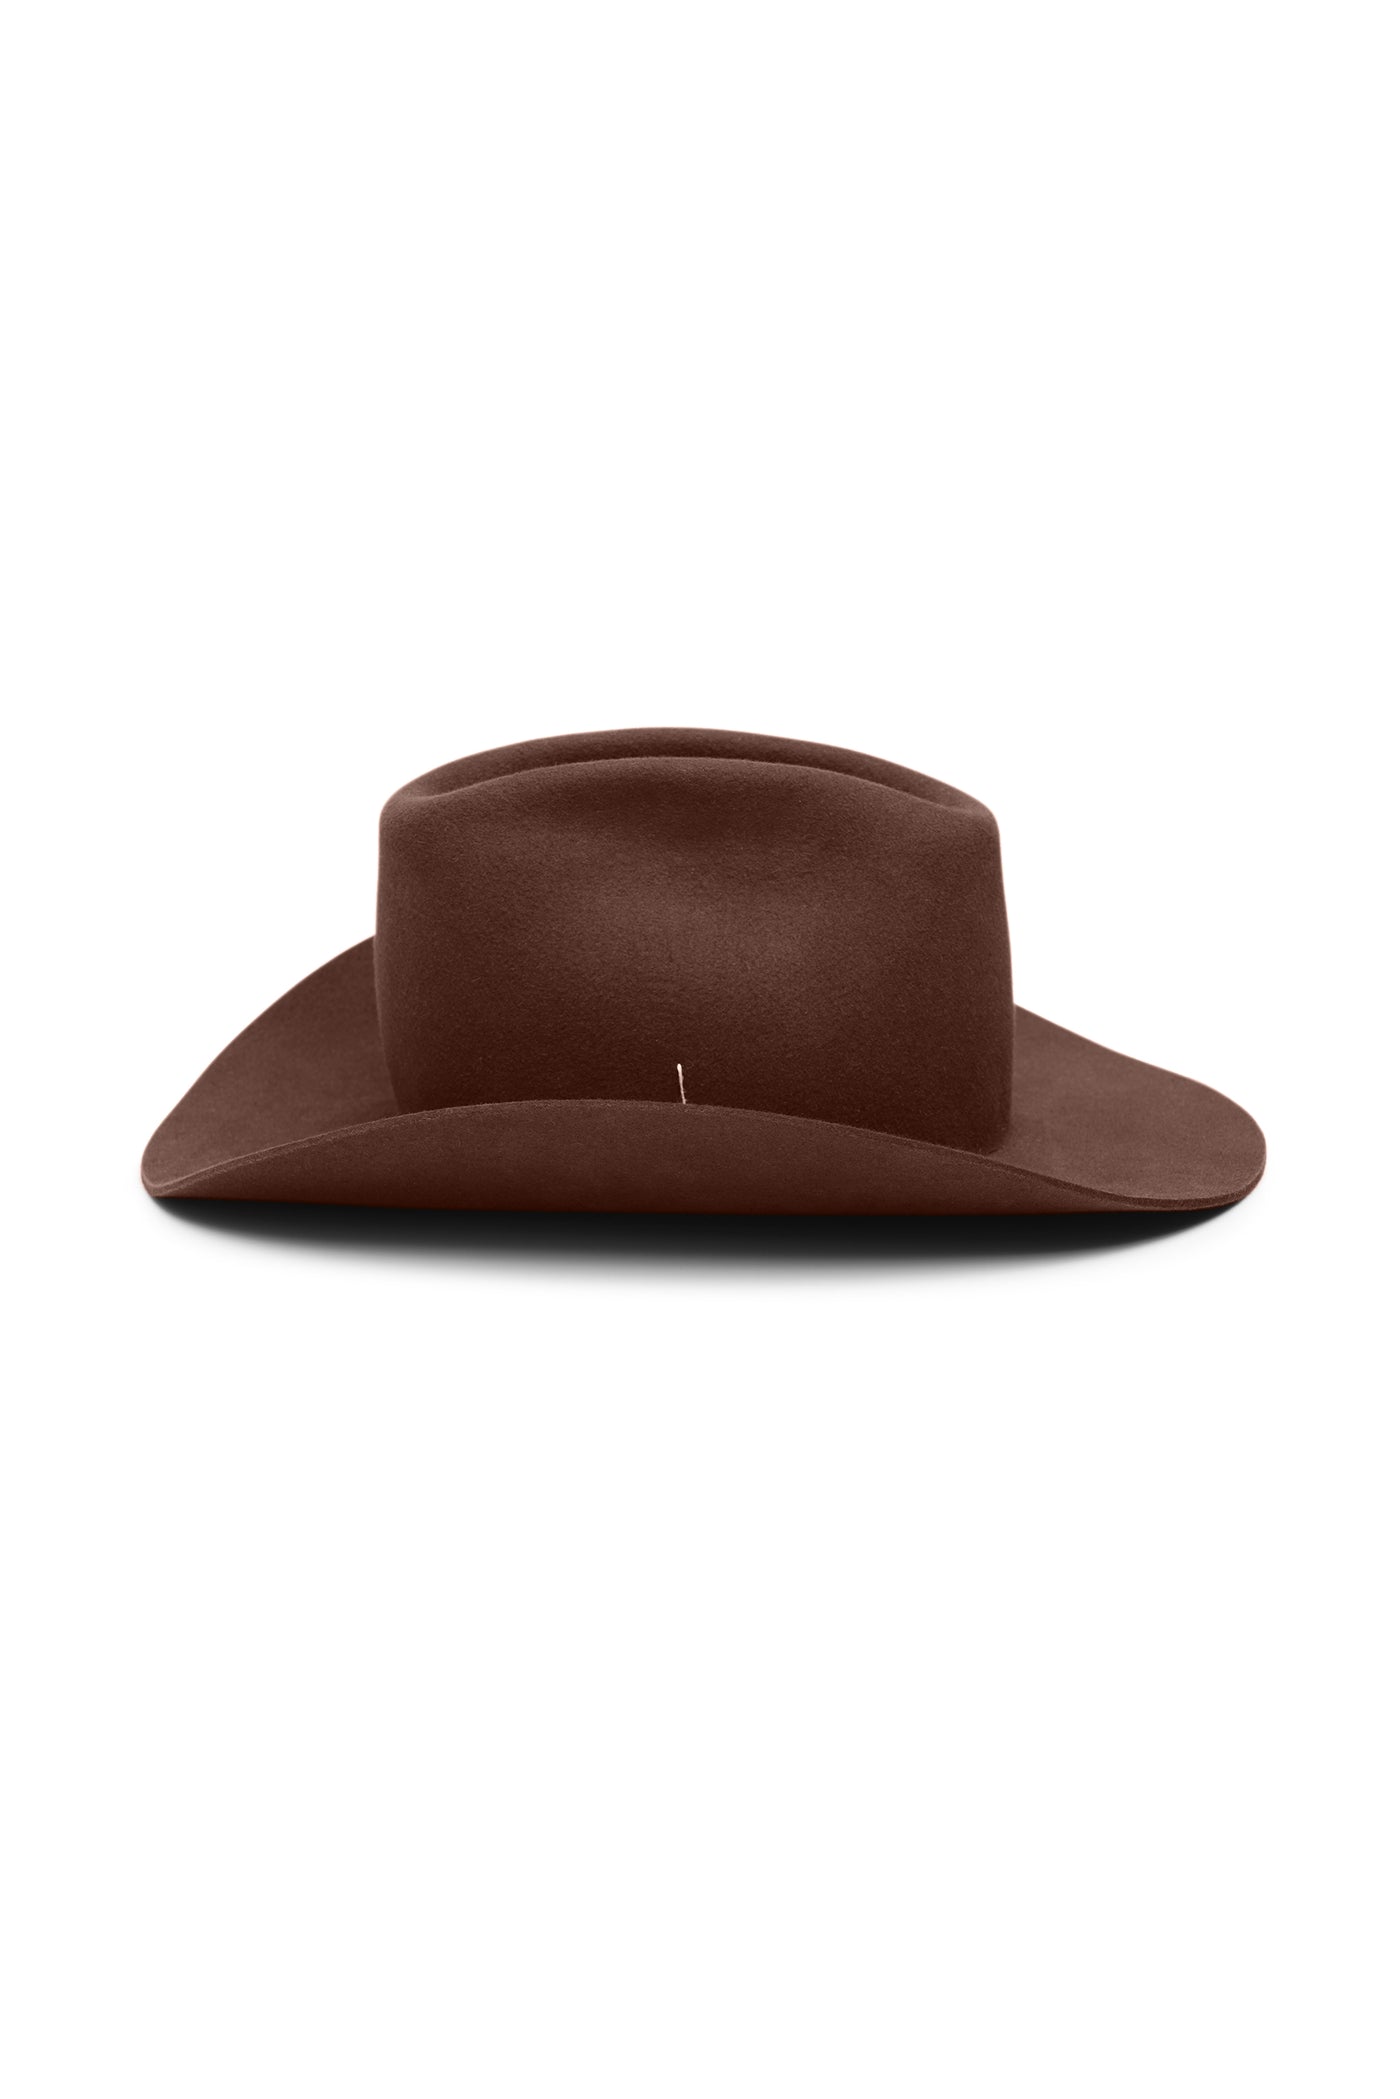 Mocca brown cowboy 100% fur felt hat with a wide brim and center crease. Unisex hat style in various sizes and colors. We ship worldwide. Shop now. Each SoonNoon hat is handmade with a unique character in Stockholm, Sweden.